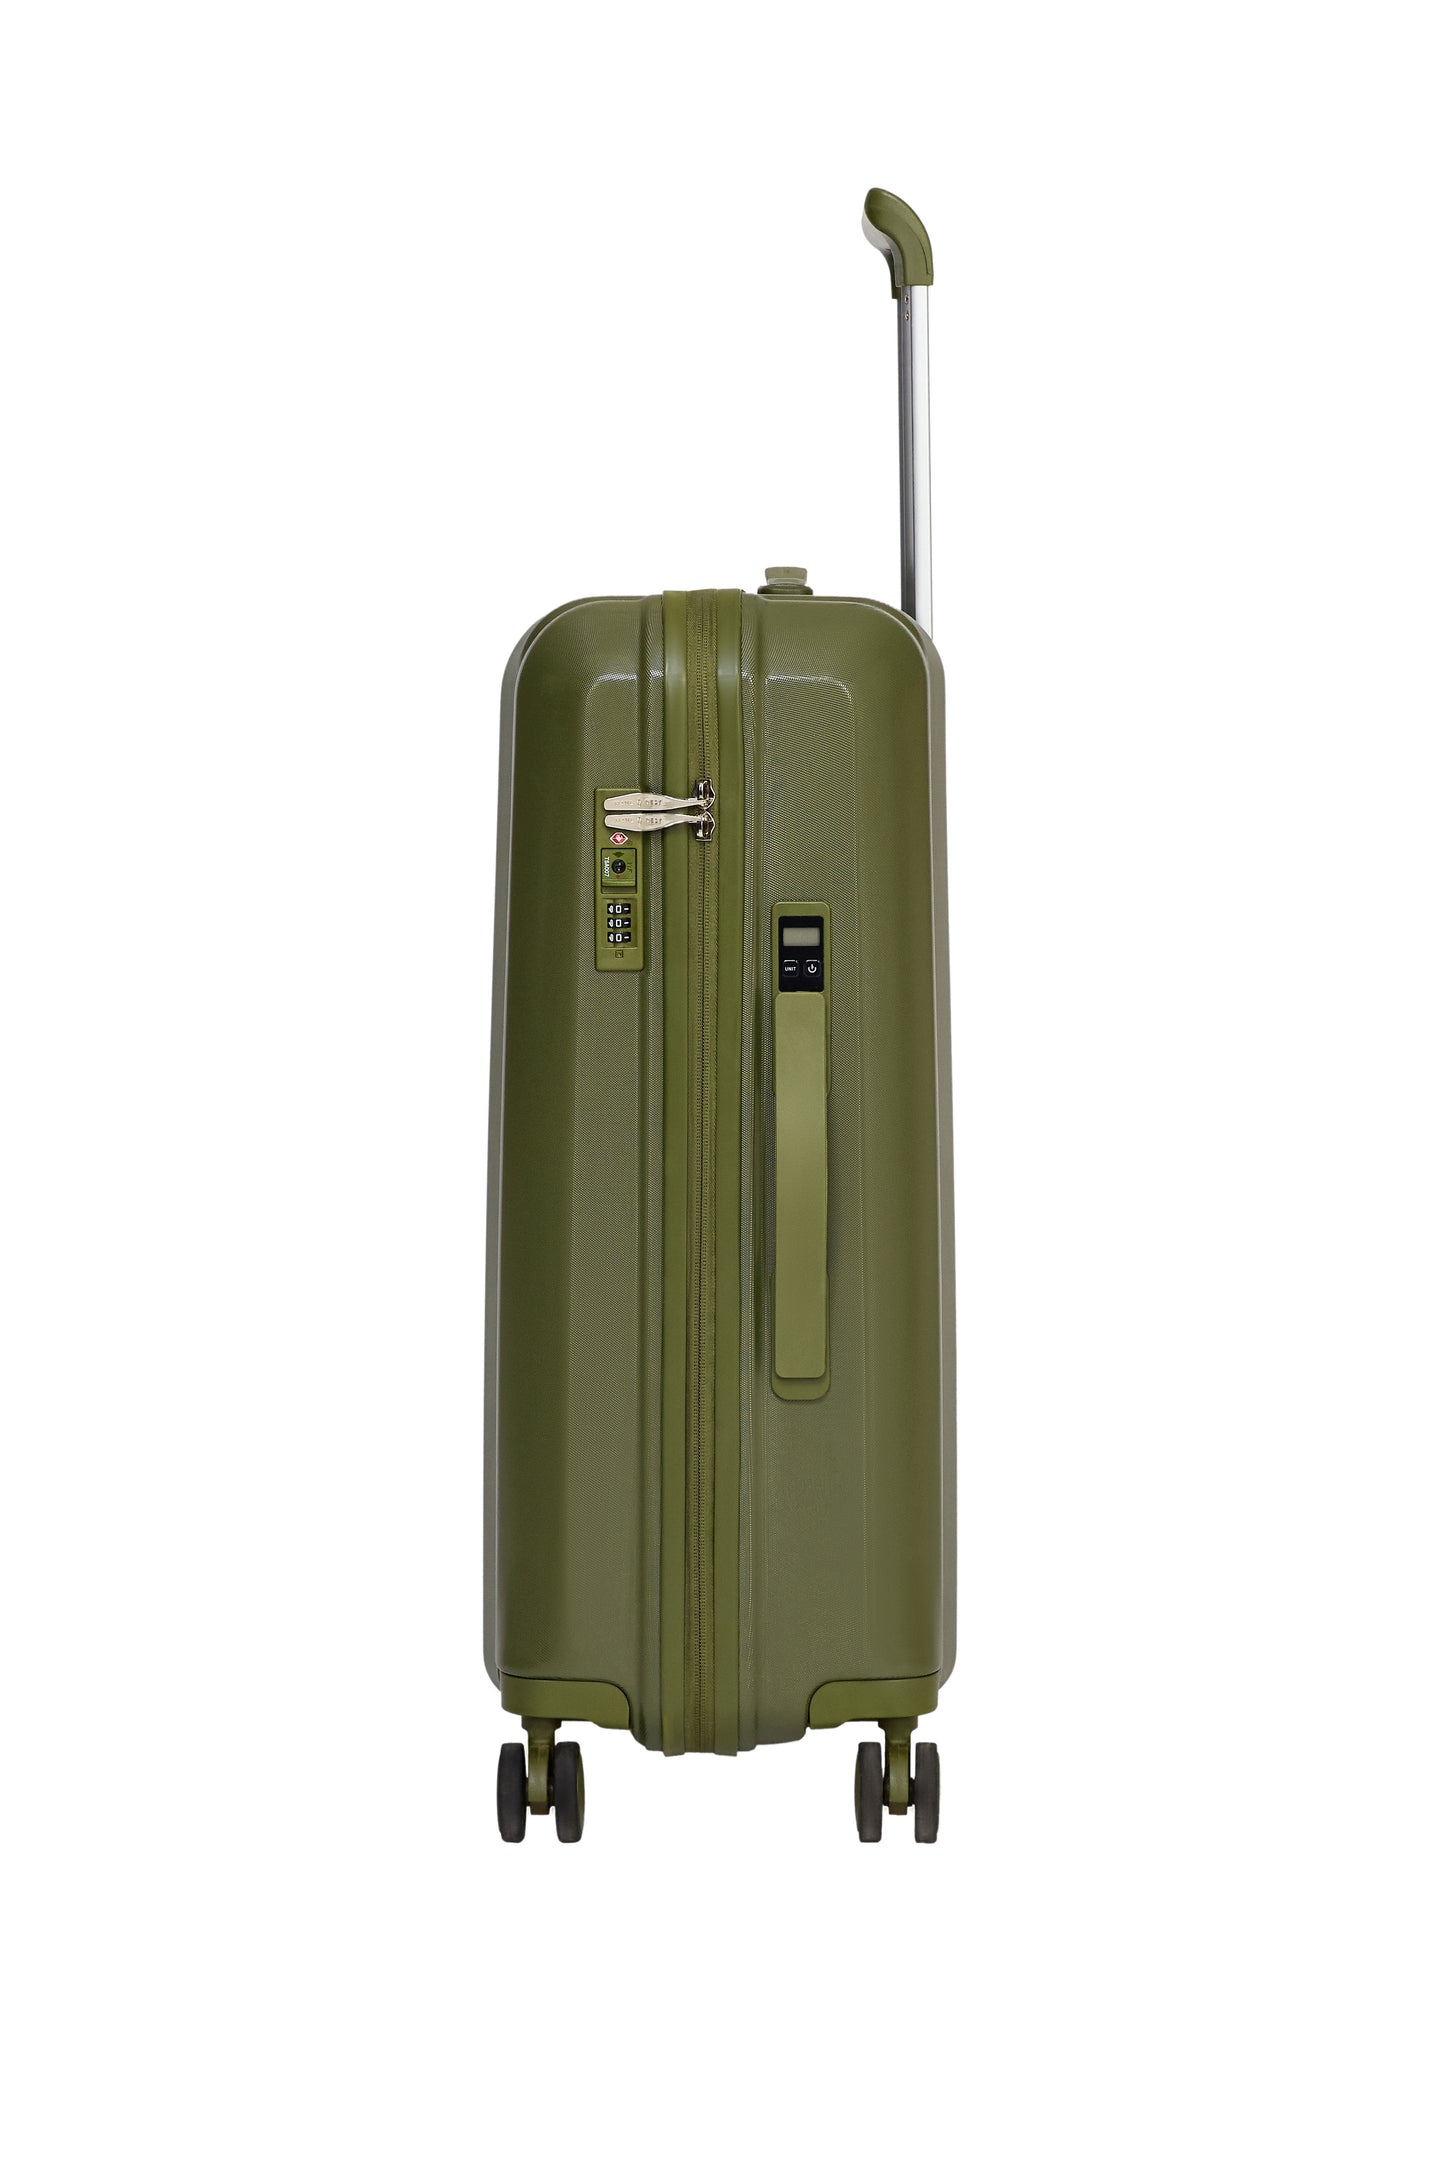 Smart suitcase Large size Green Moss HAVE A REST